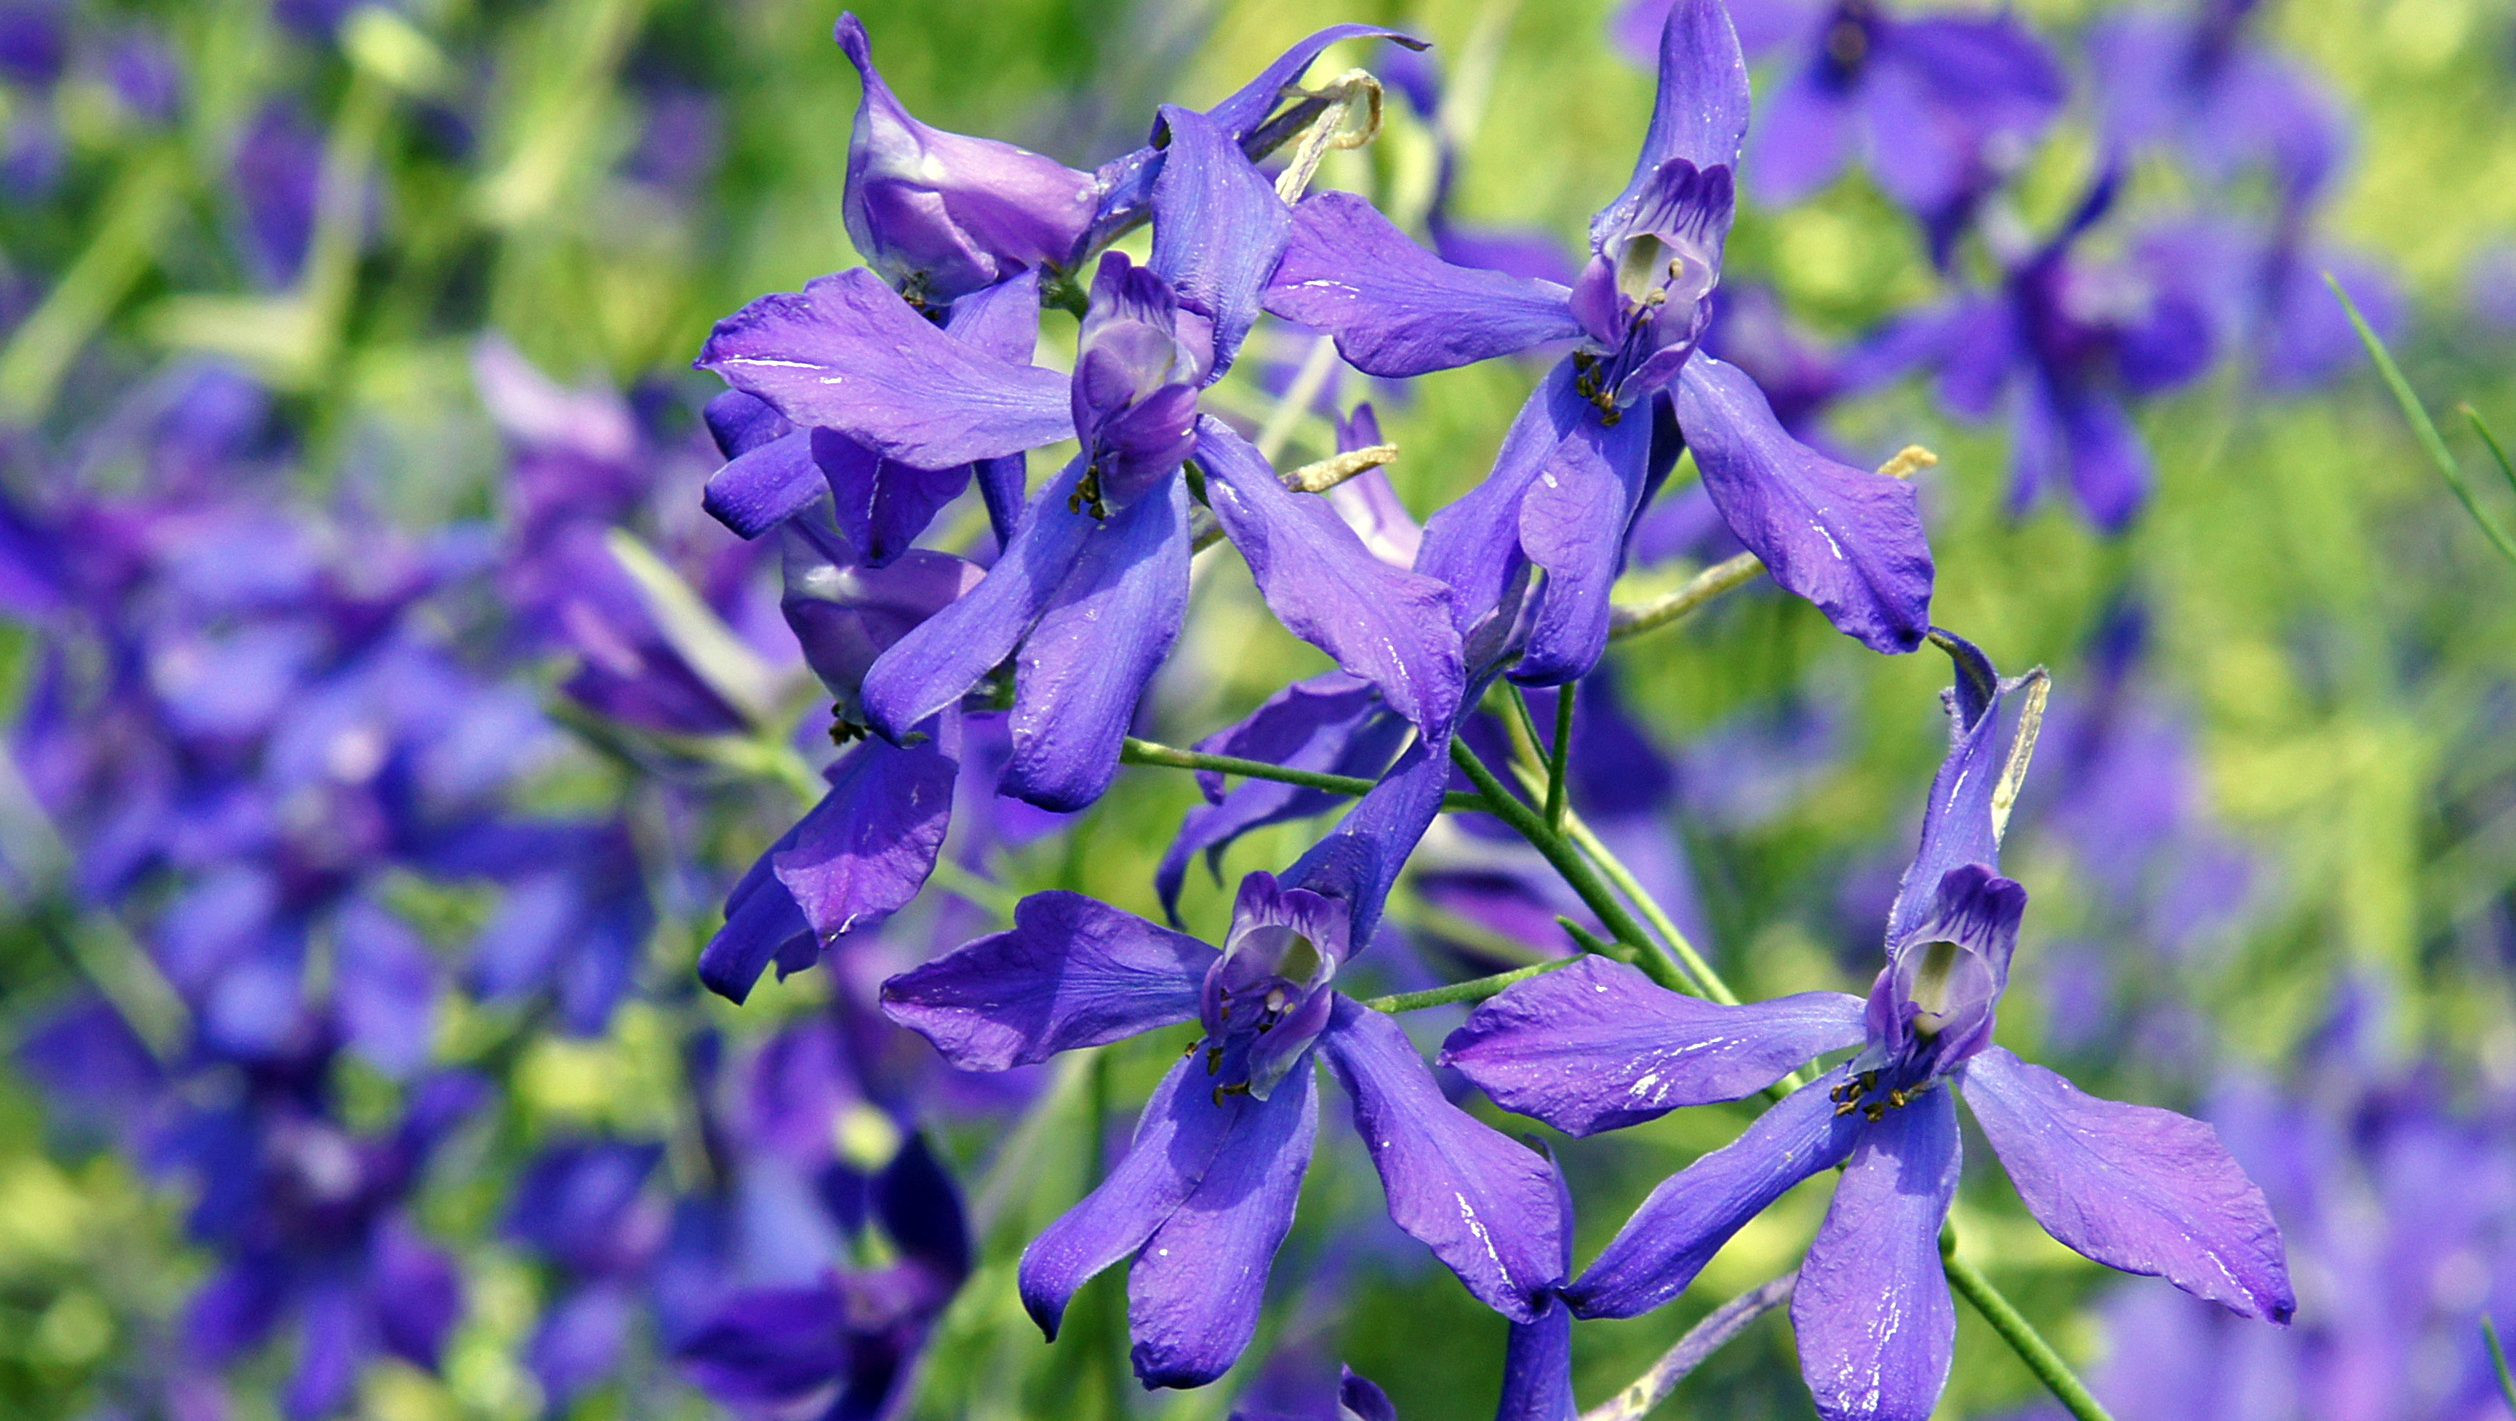 Larkspur: How To Plant, Grow & Care For The Dangerous Larkspur Flower